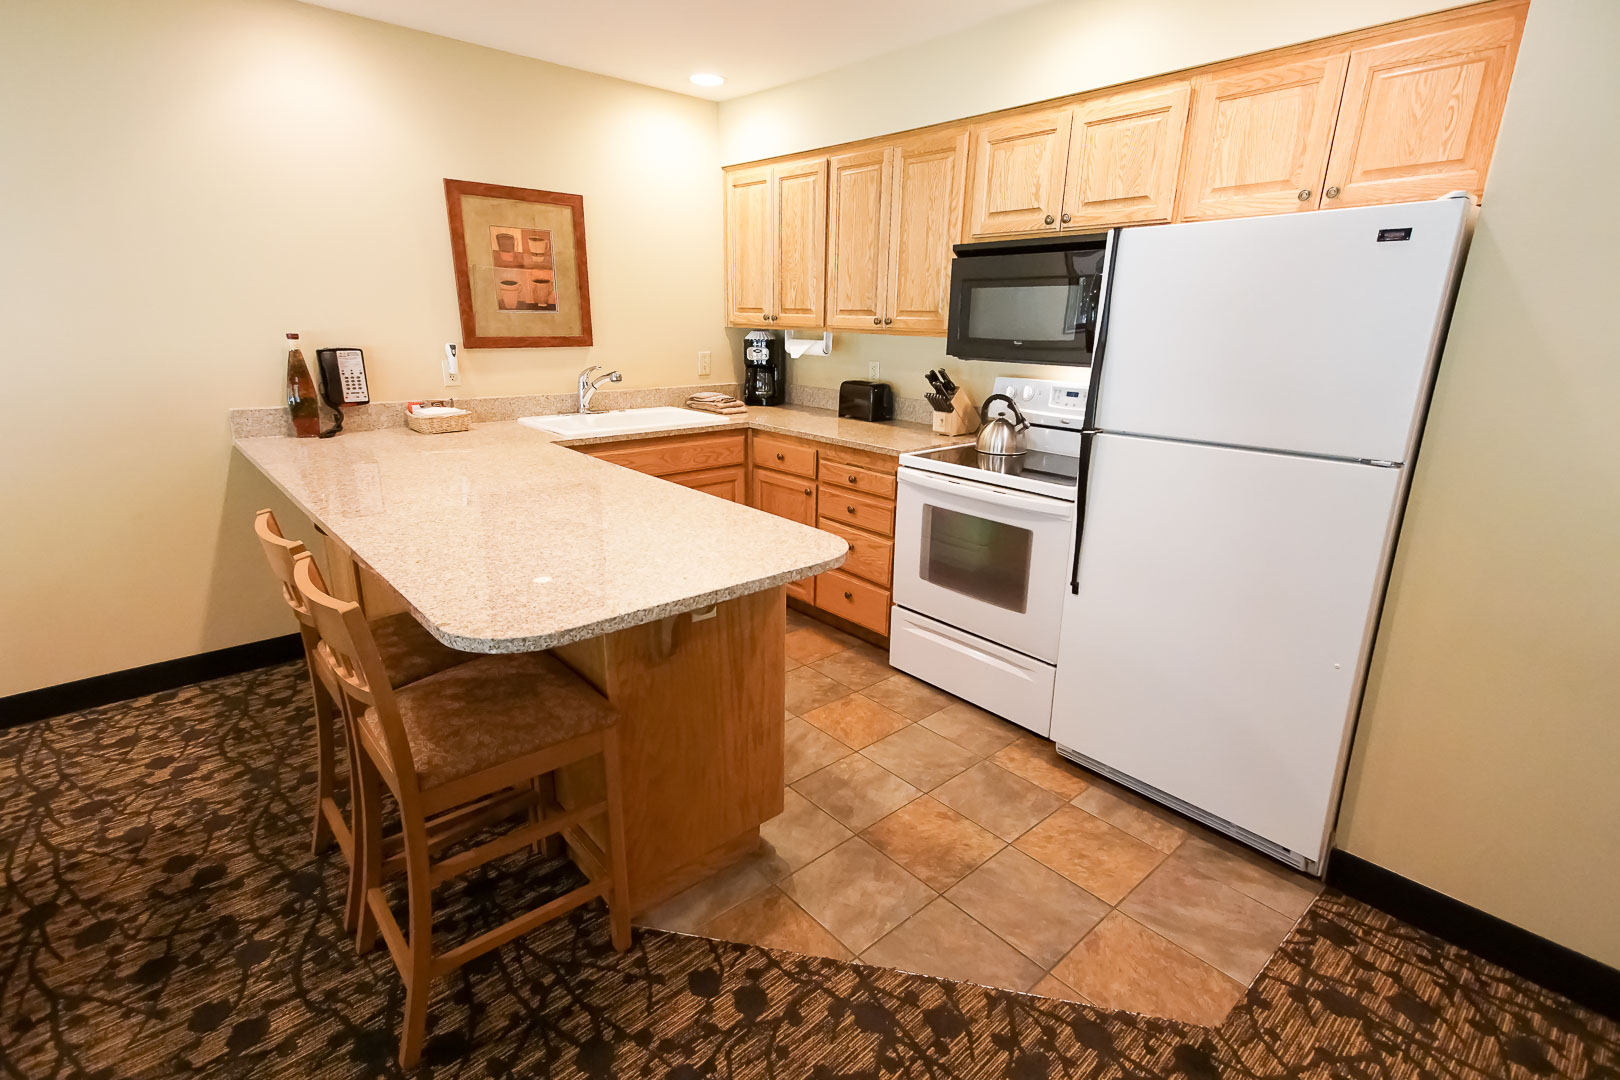 A charming kitchen at VRI's Whispering Woods Resort in Oregon.